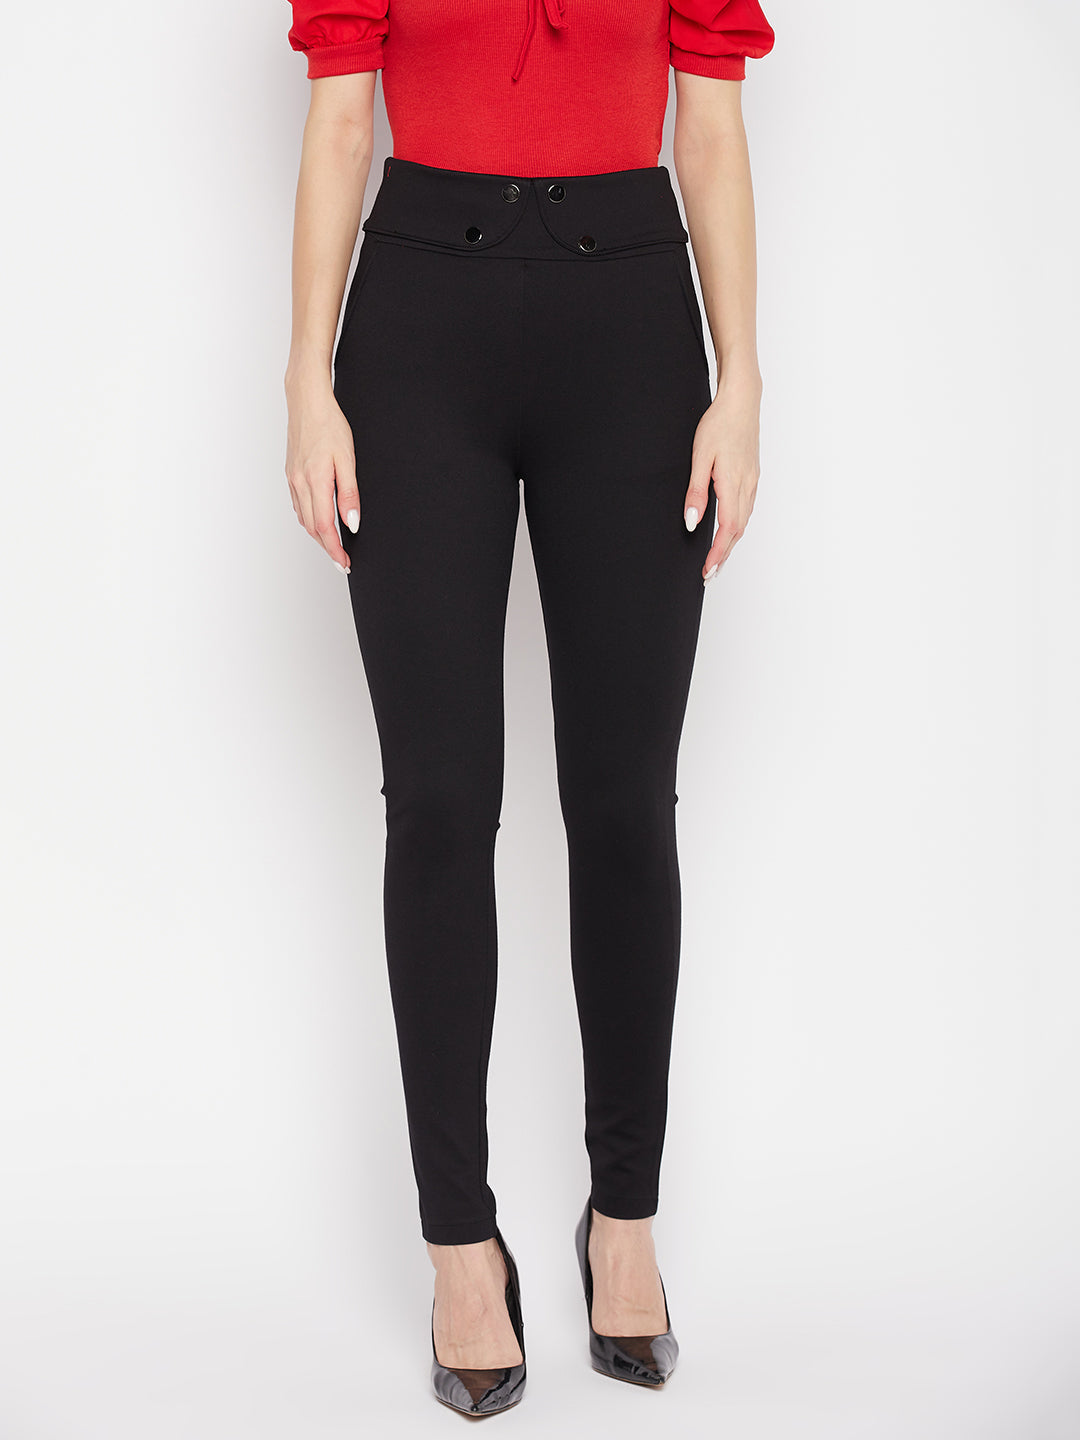 Clora Black Solid Relaxed Fit Jeggings